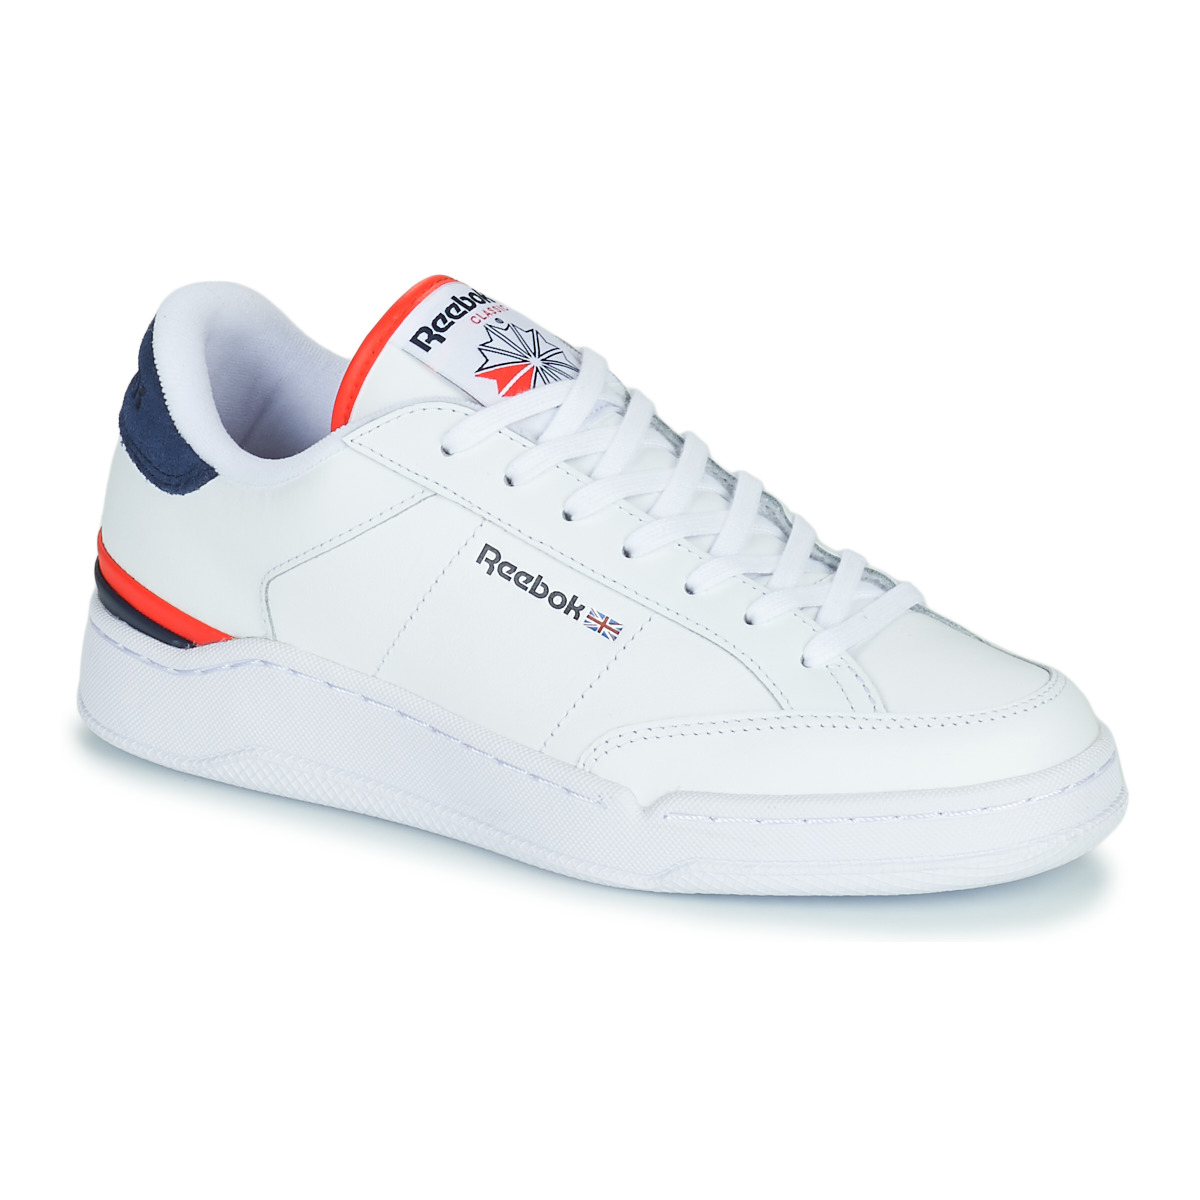 Chaussures Reebok Classic Leather Pearlized Rose Gold AD COURT Blanc / Bleu / Rouge